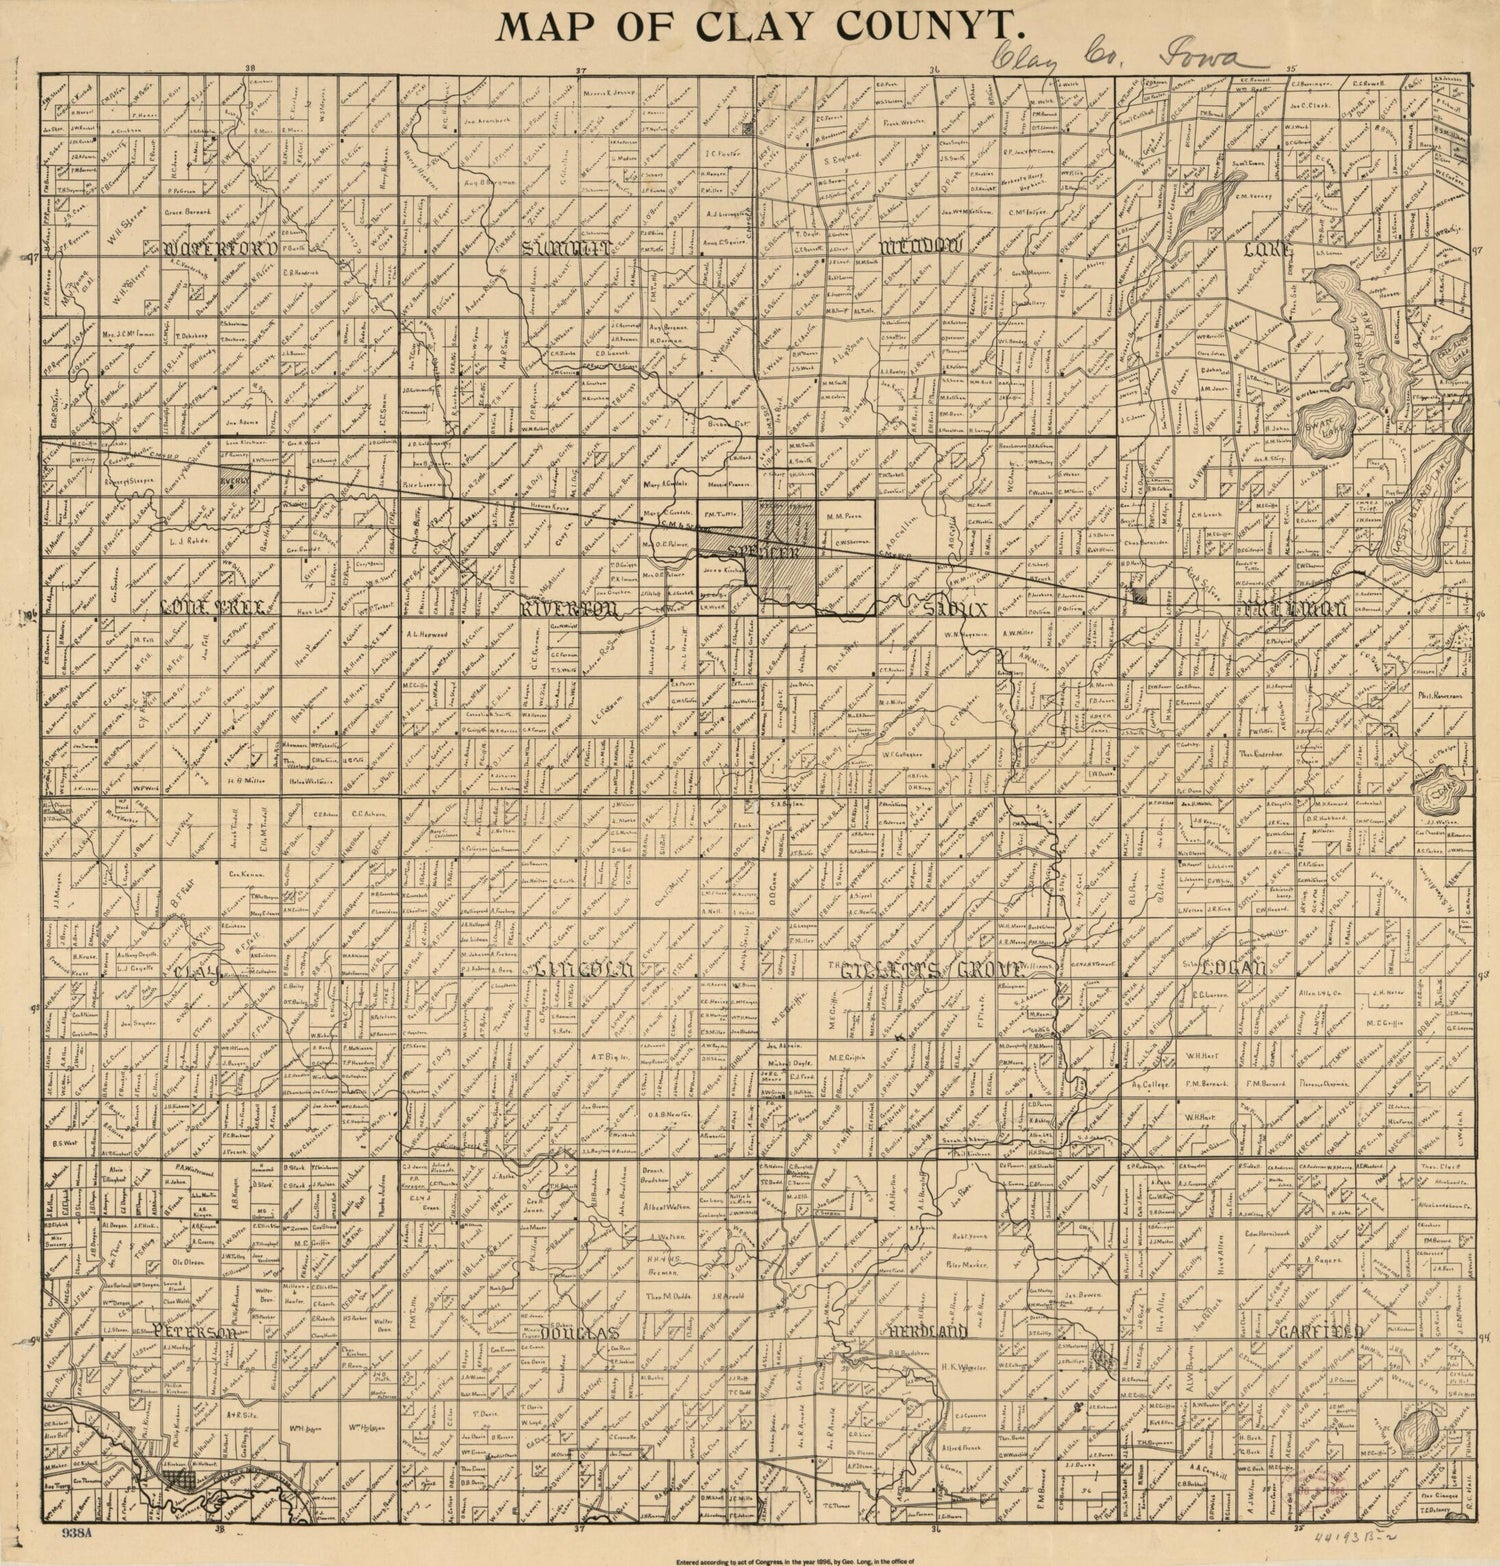 This old map of Map of Clay Counyt. (Map of Clay County) from 1896 was created by Geo Long in 1896